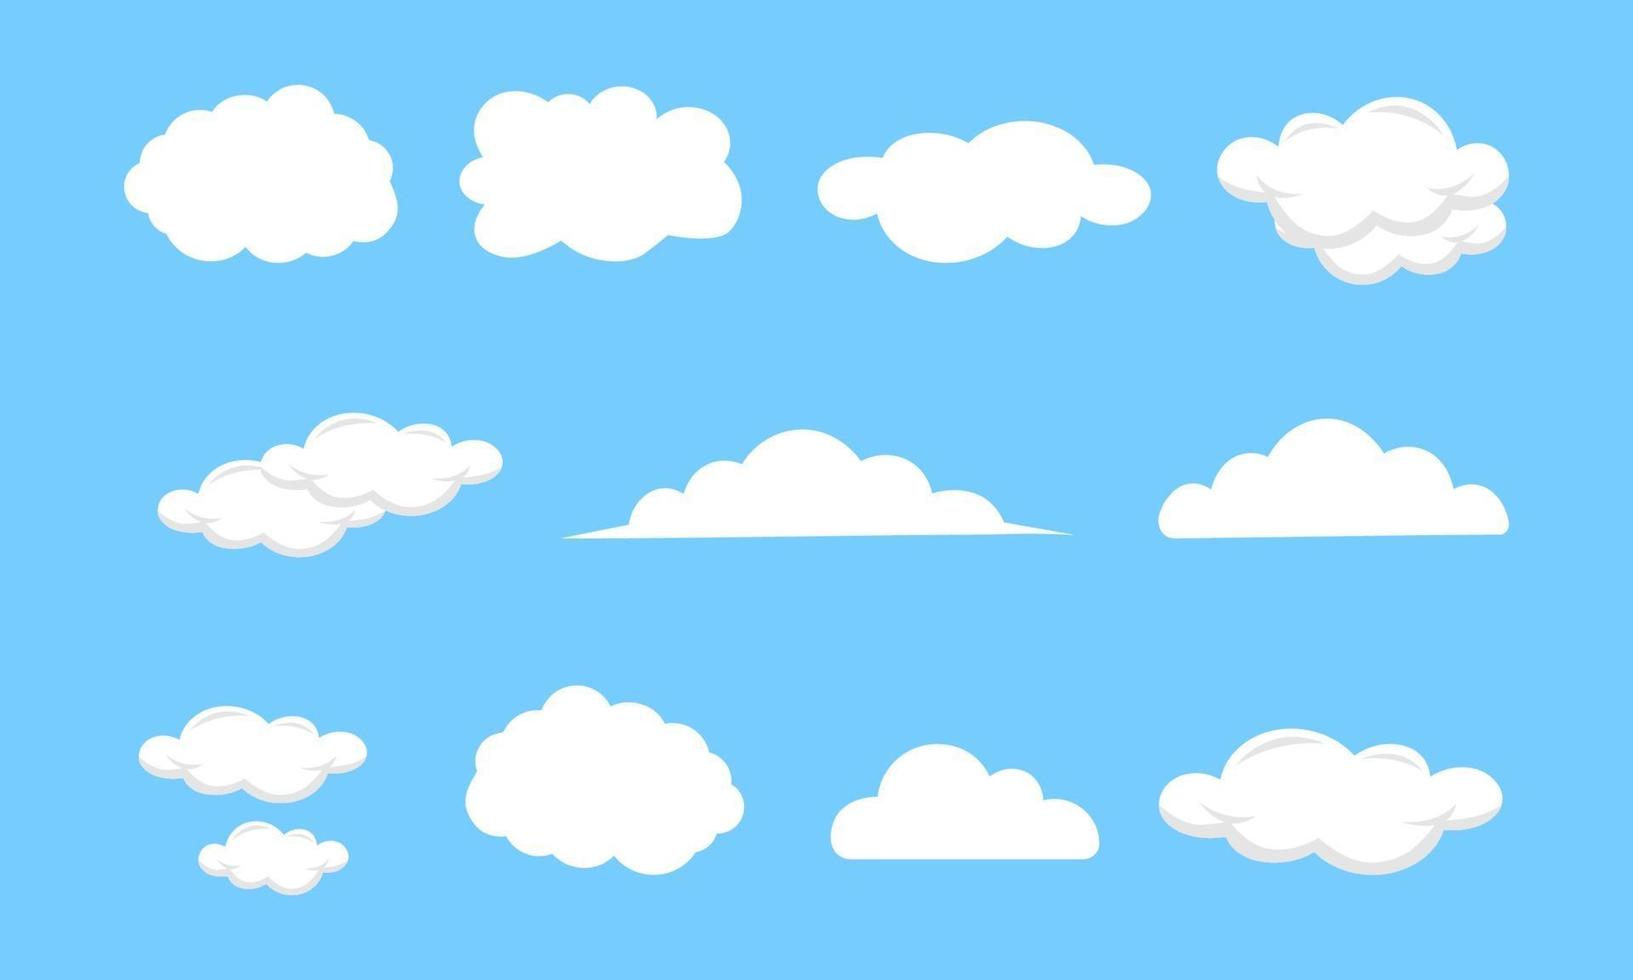 White Clouds Vector Set